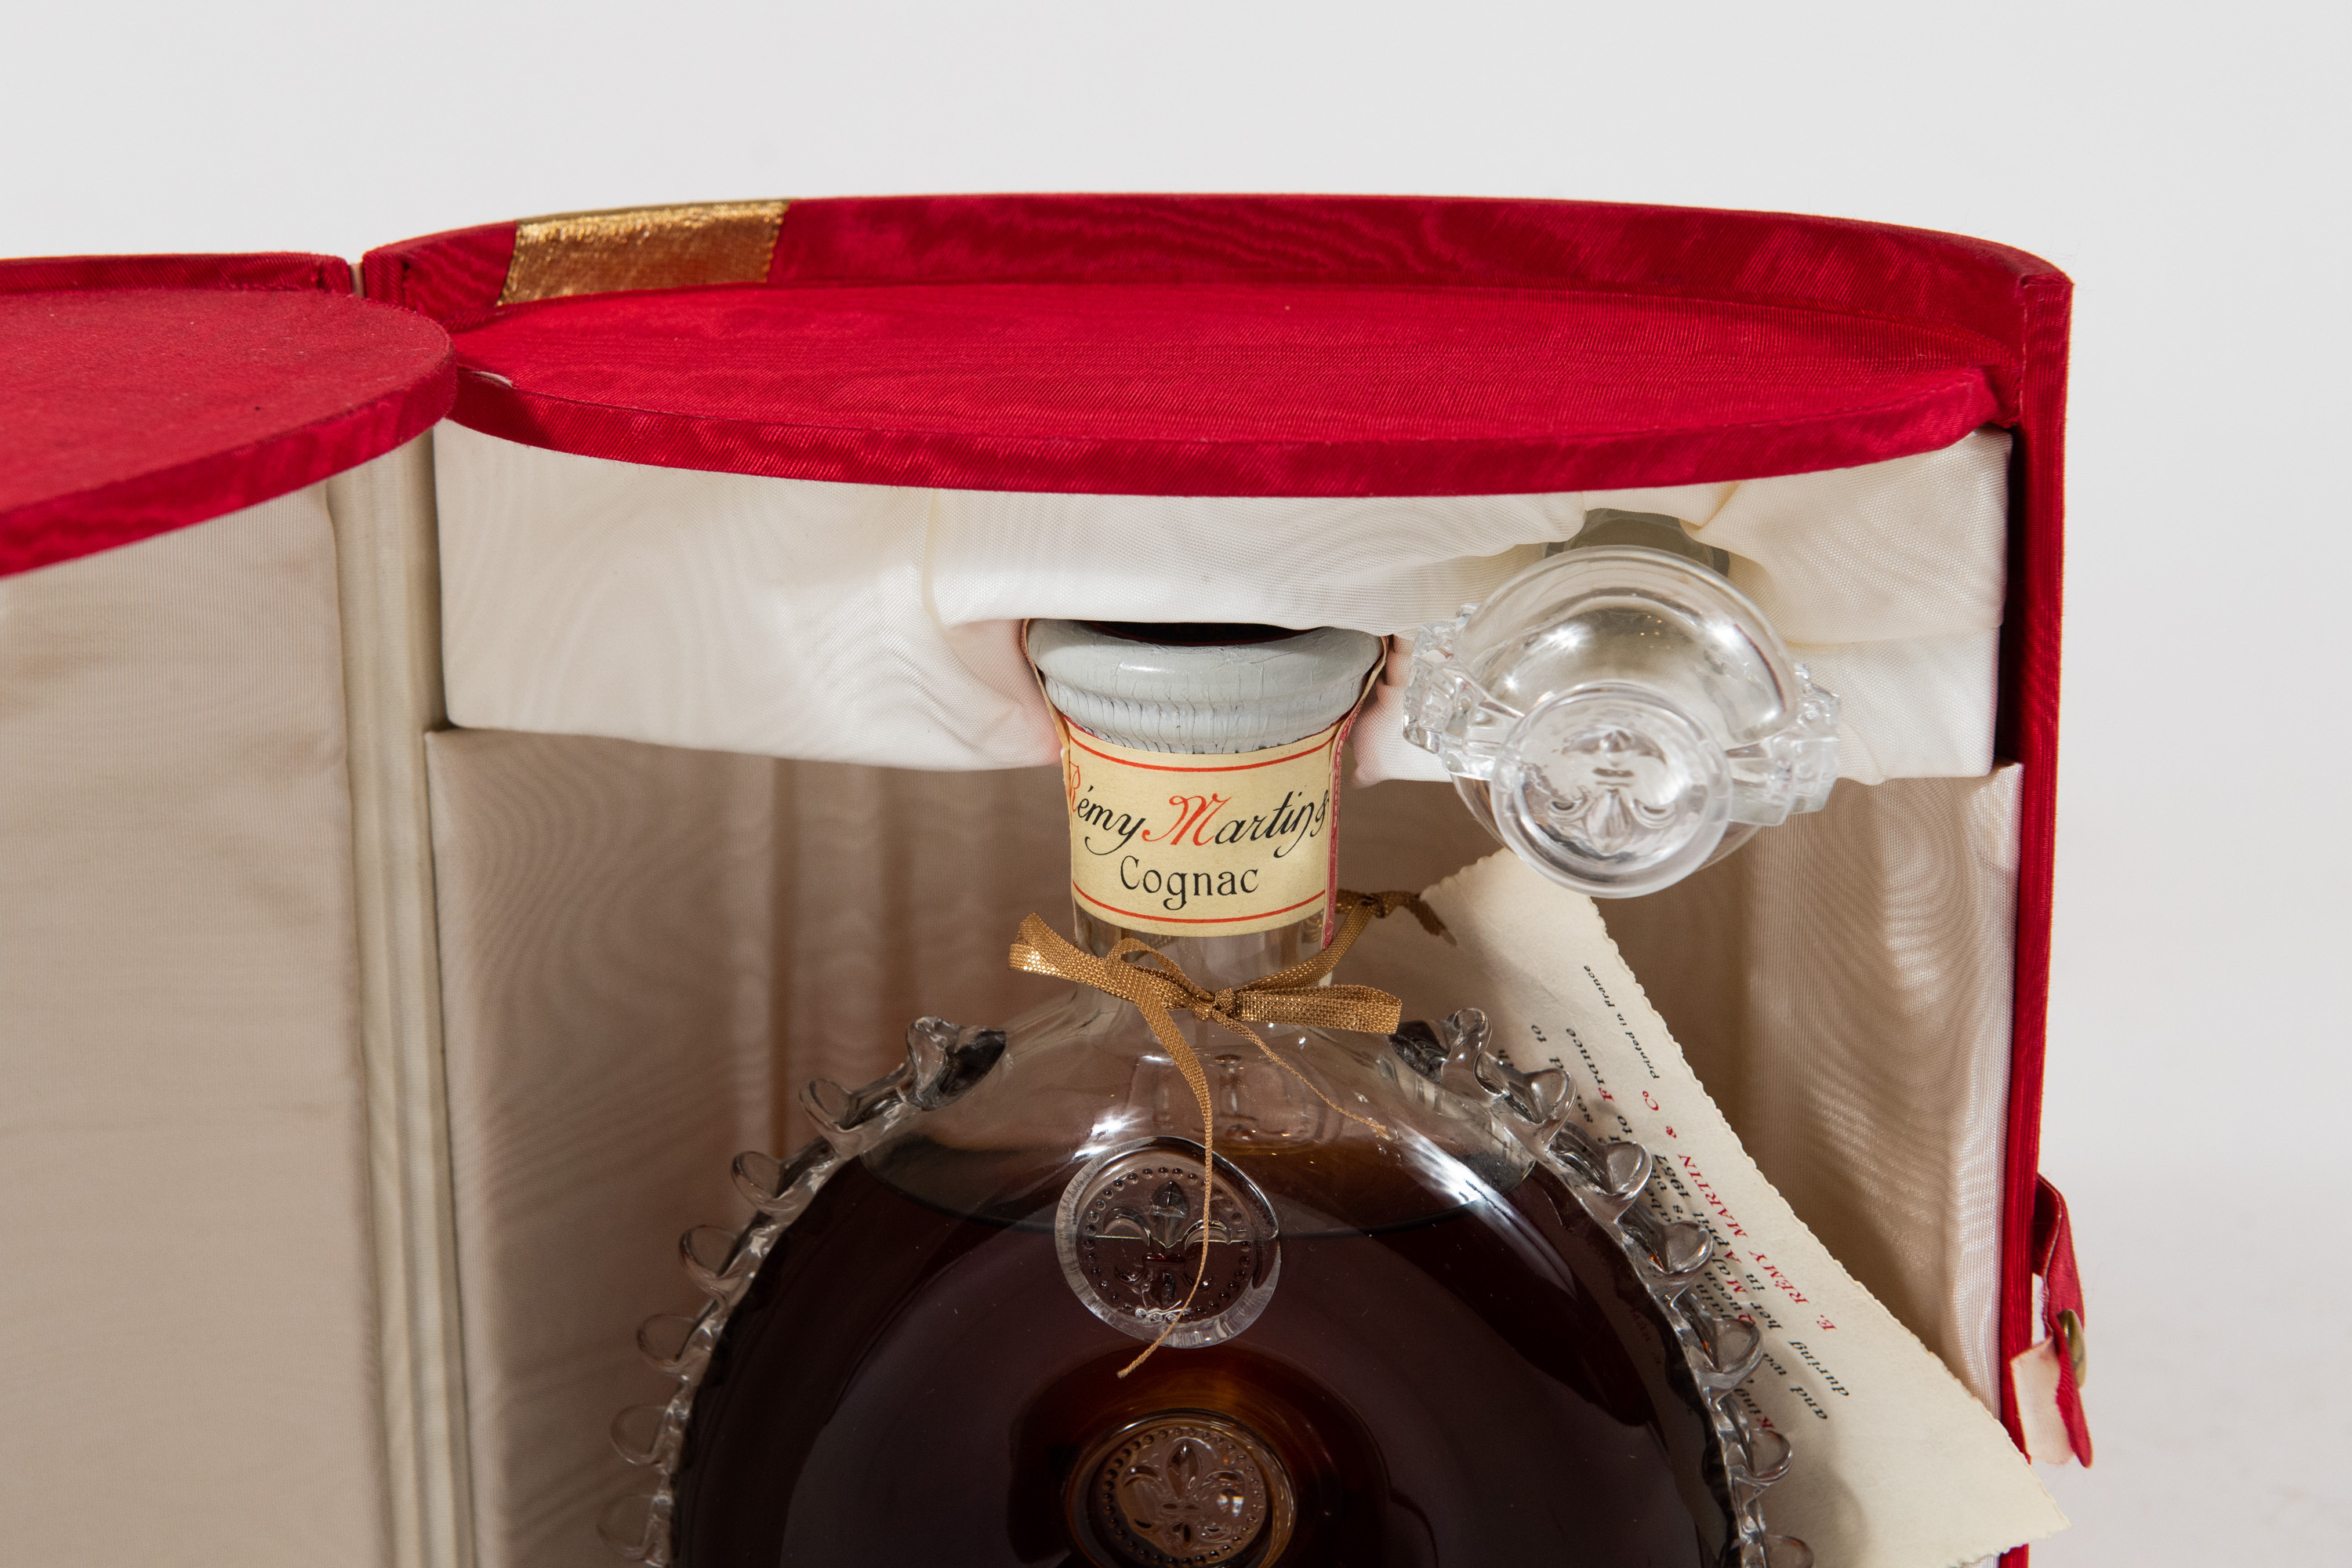 Baccarat Remy Martin 'Louis XIII' - Image 4 of 6